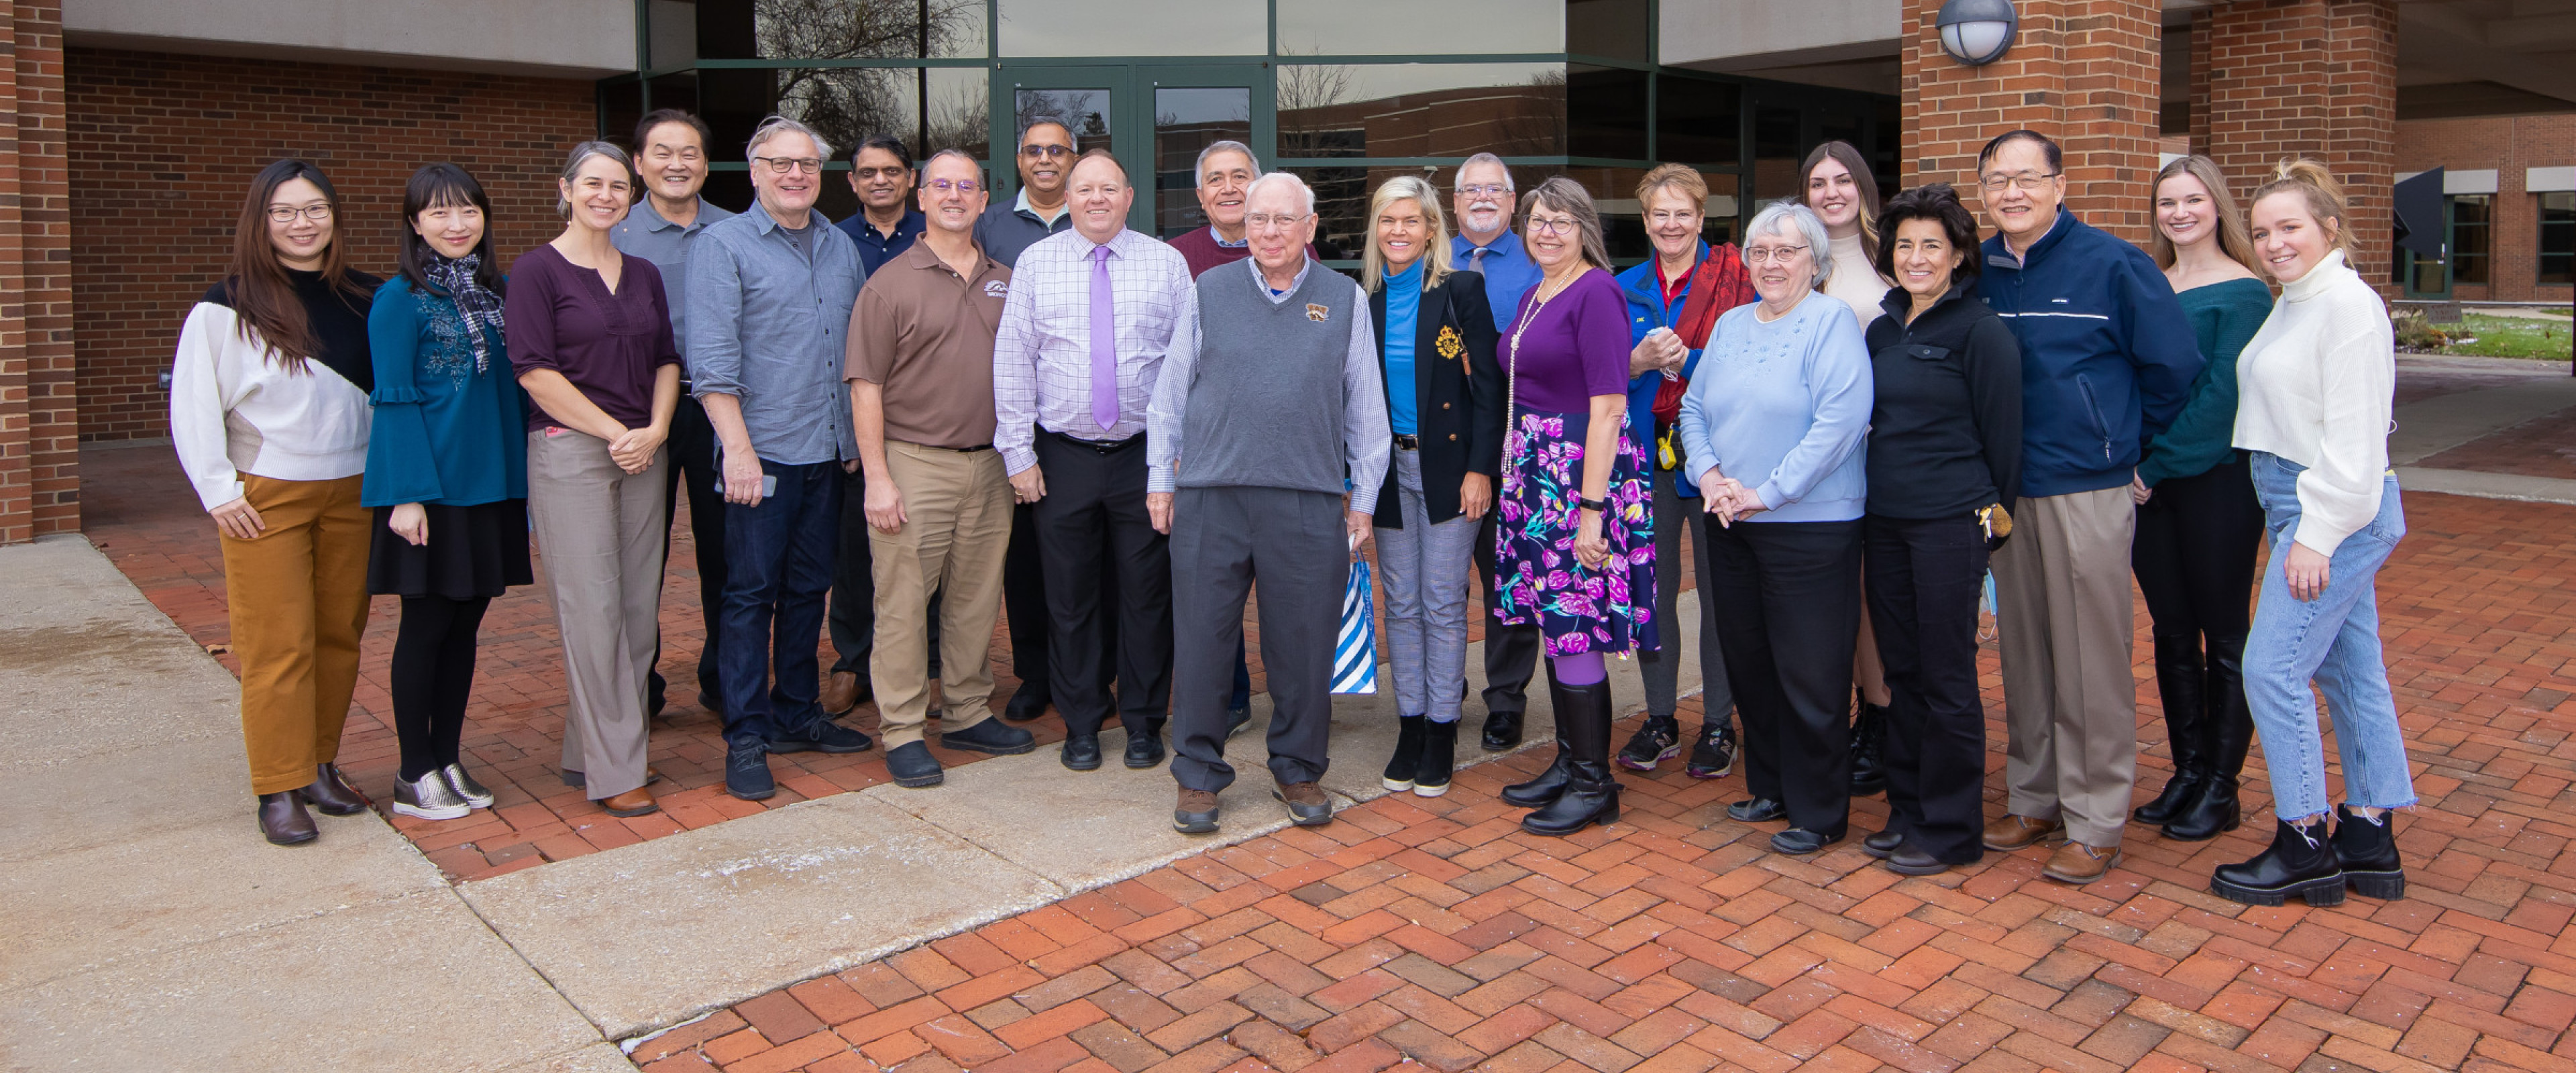 Dr. Tom Carey, surrounded by faculty and friends outside of the Haworth College of Business.